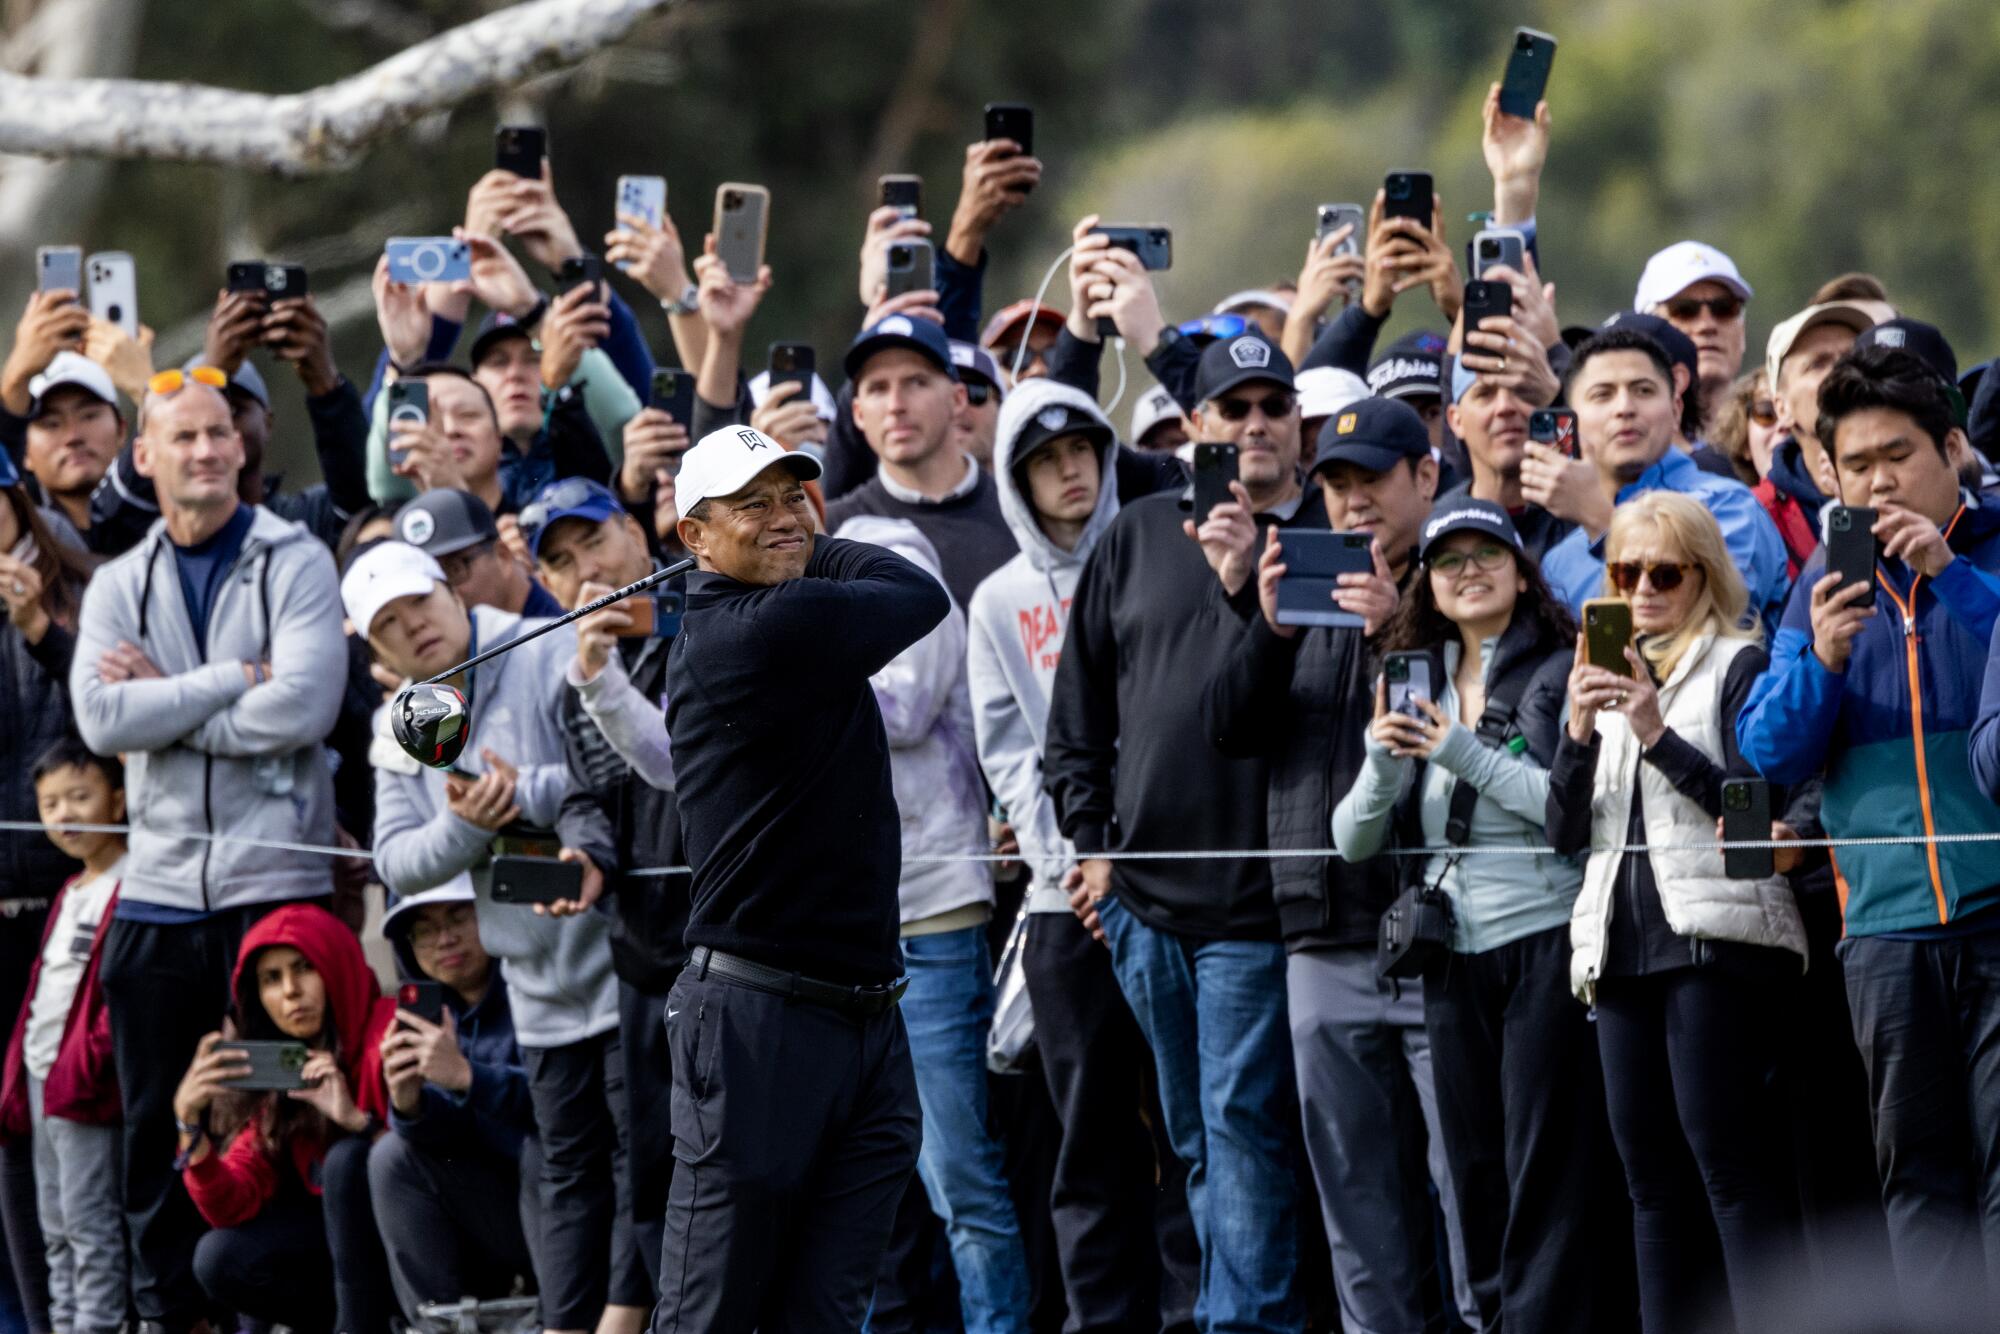 Tiger Woods tees off on the 18th hole in front of a large crowd during round two of the Genesis Invitational.